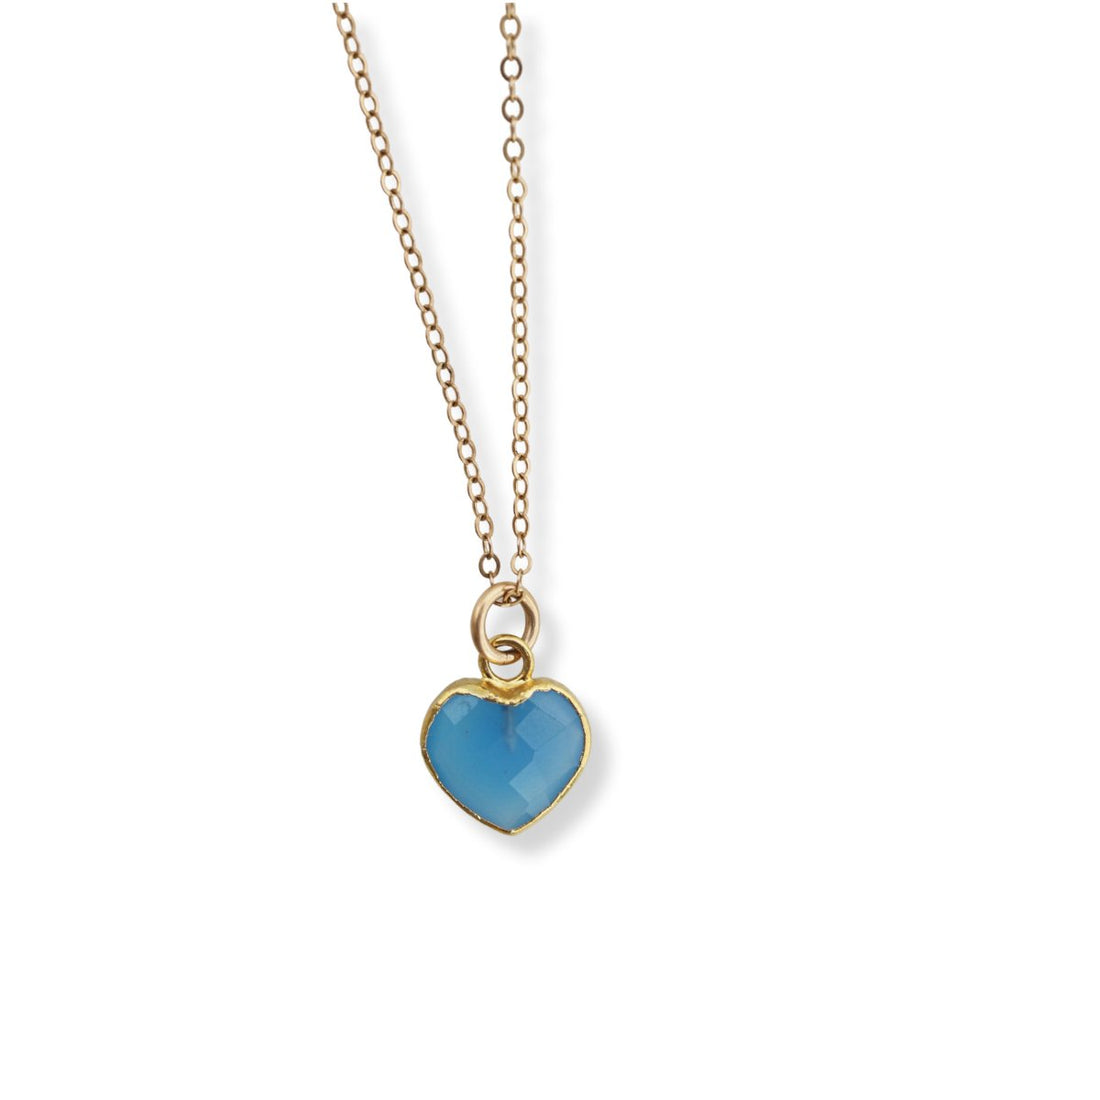 Esme Gemstone Heart Shaped Necklaces - Chocolate and Steel